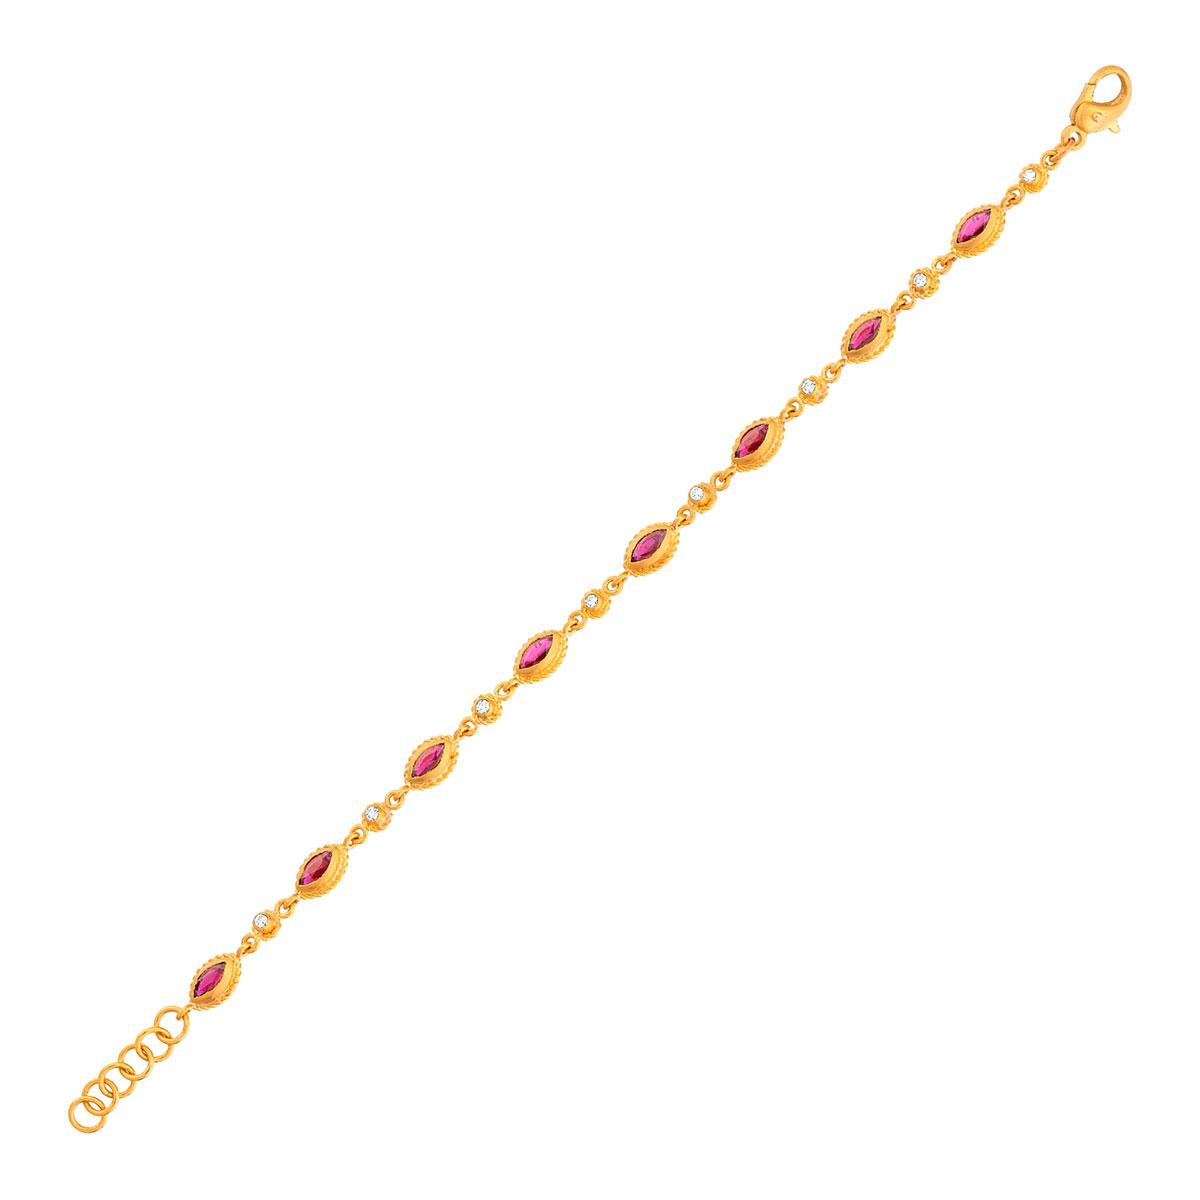 Marquise Ruby and Diamond Bracelet